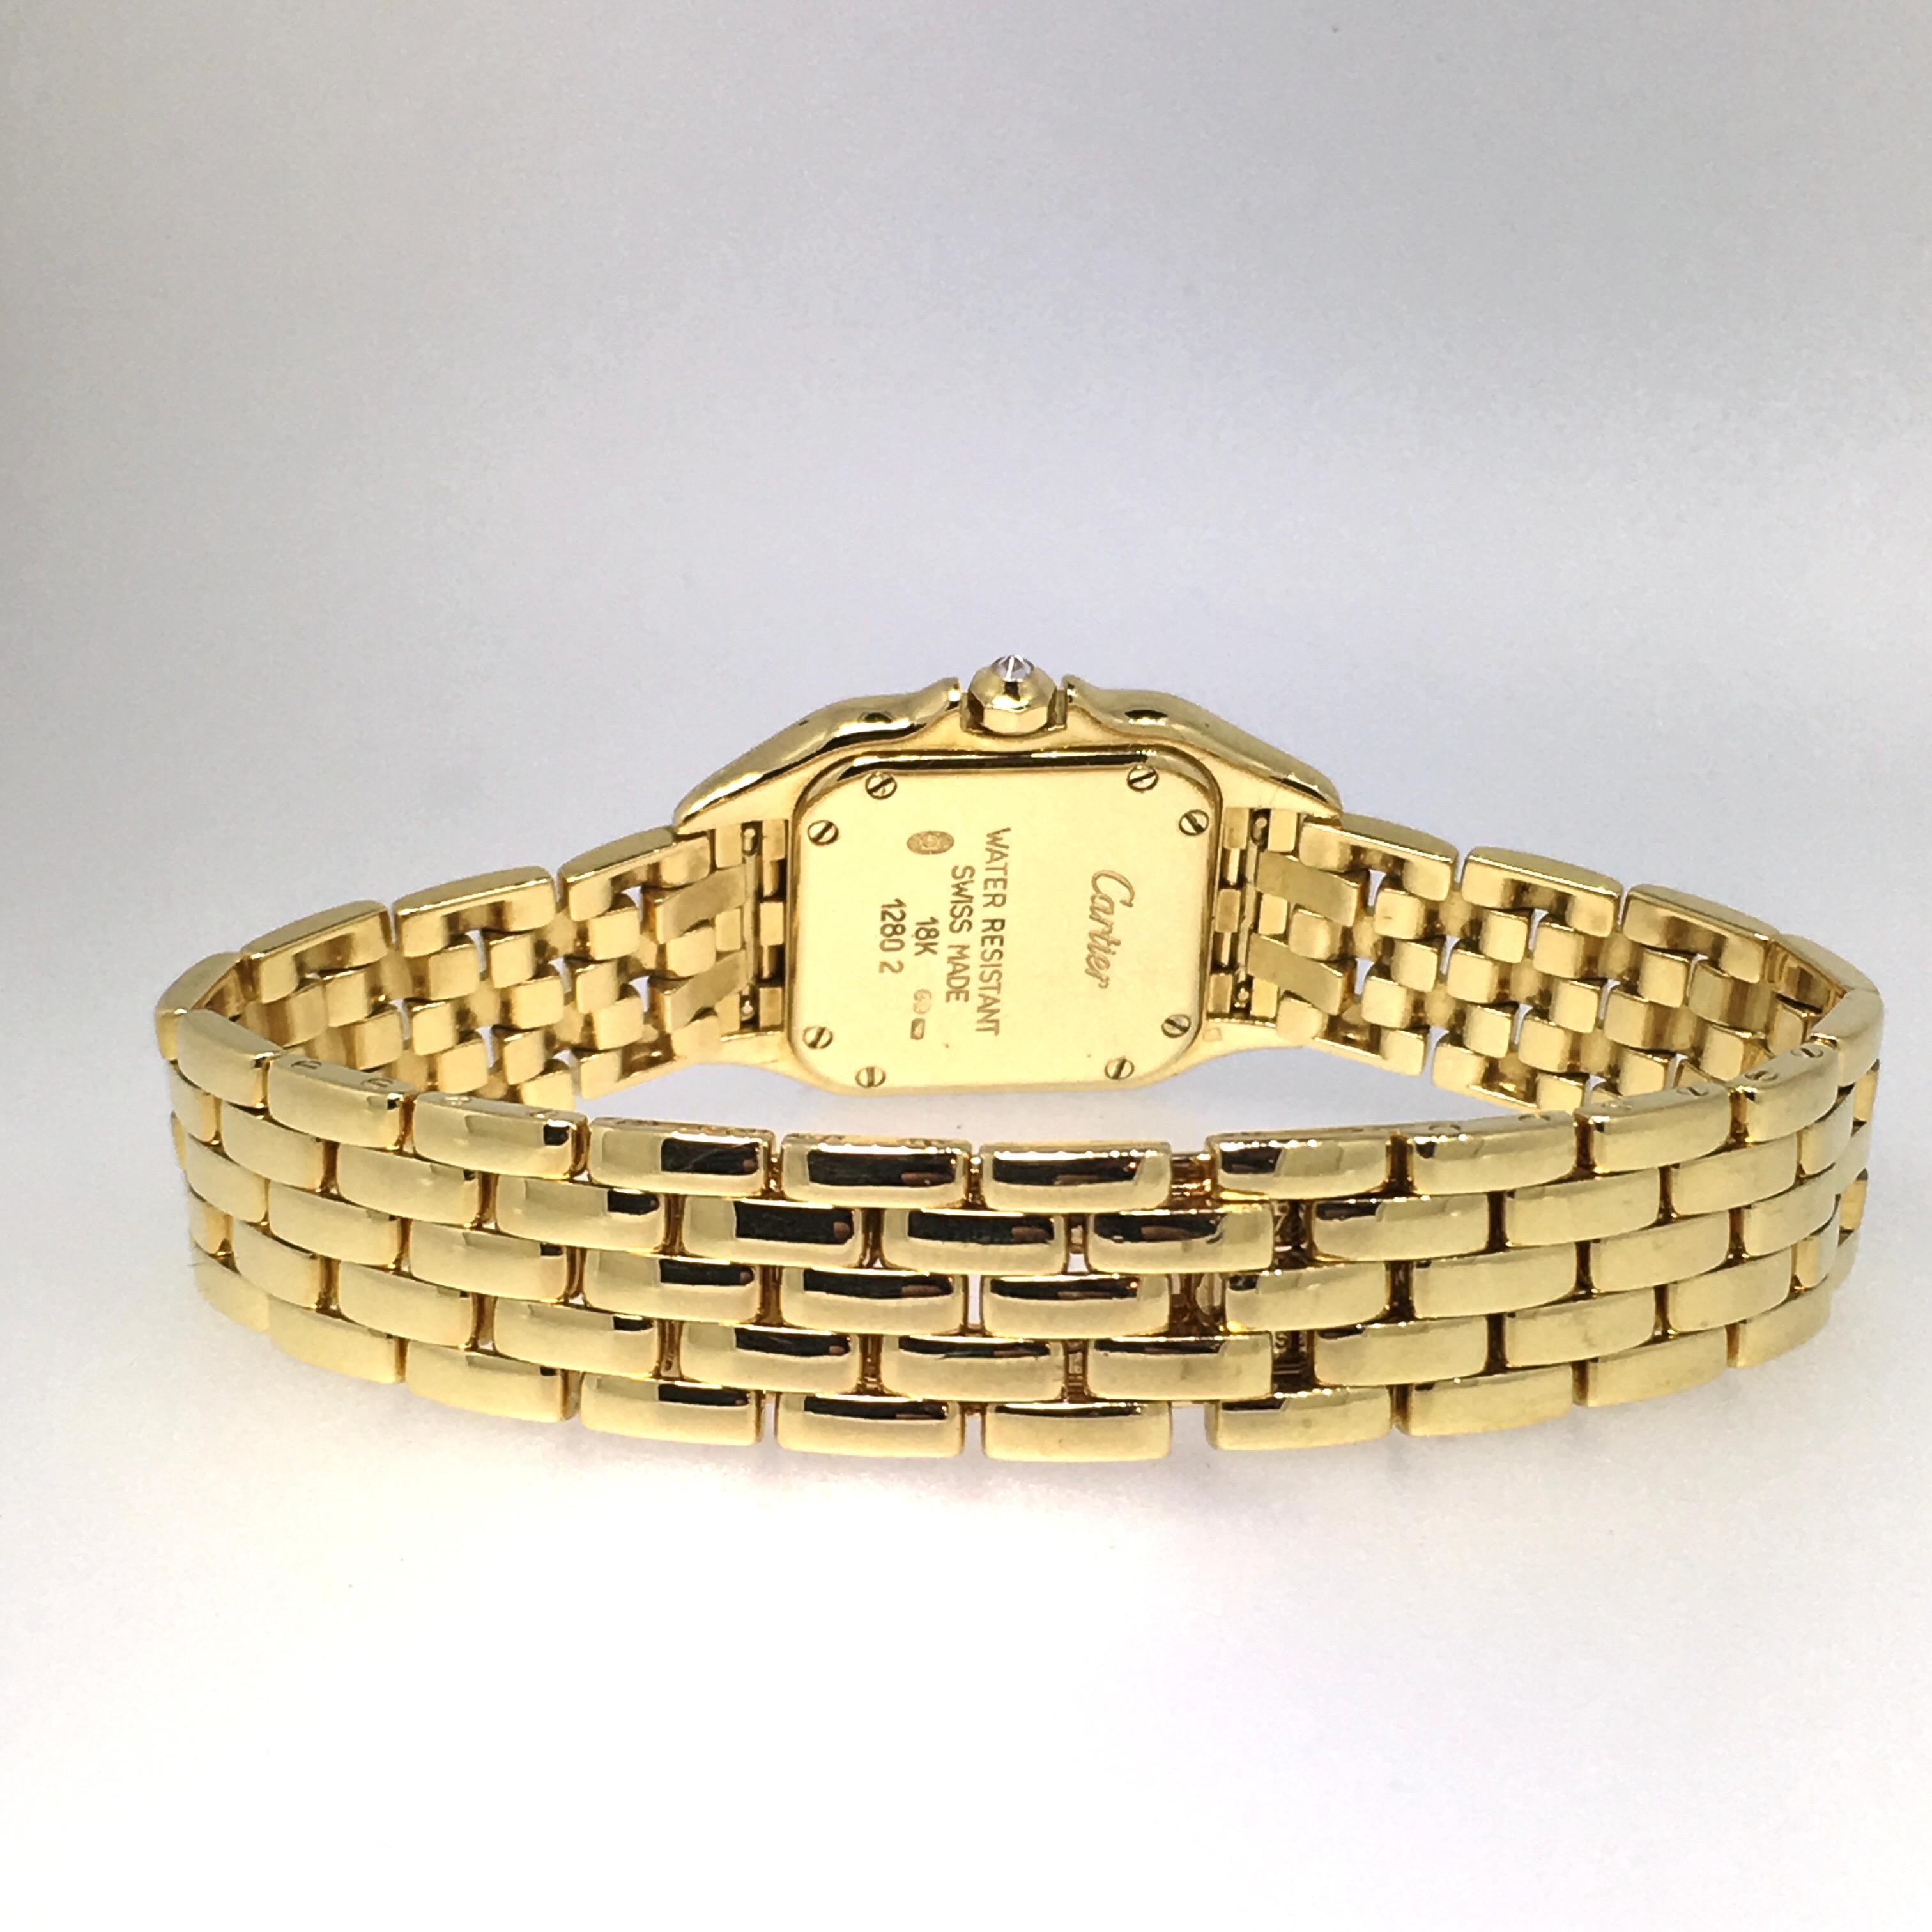 Women's Cartier Panthère, Yellow Gold, Diamonds, Reference 1280-2, Mint Condition